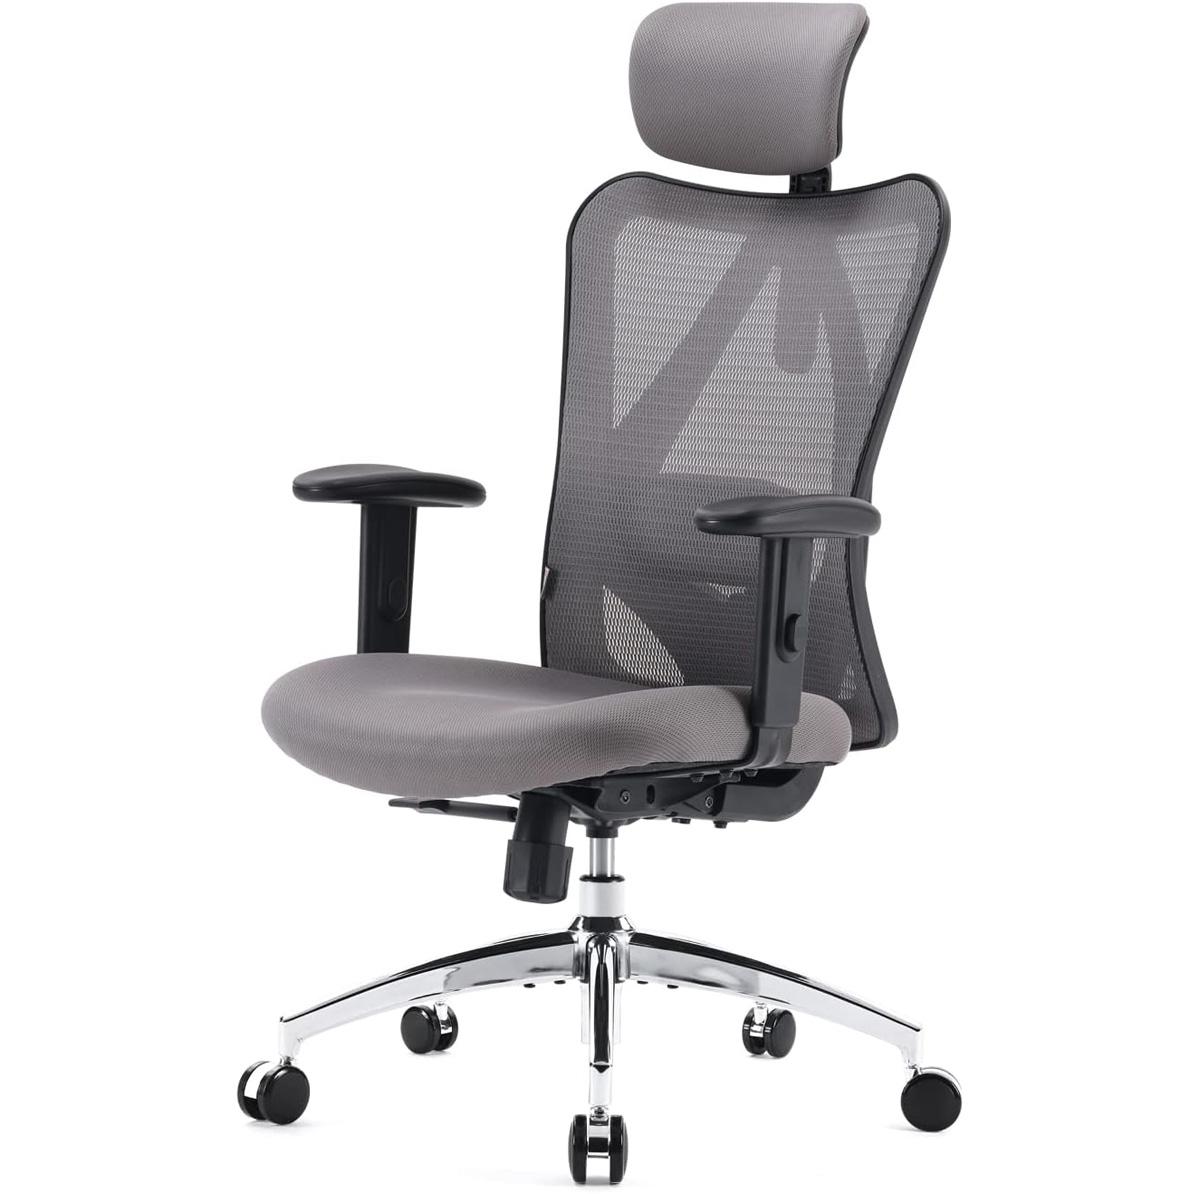 Sihoo M18 Ergonomic Office Chair for Big and Tall People Headrest for $109.99 Shipped